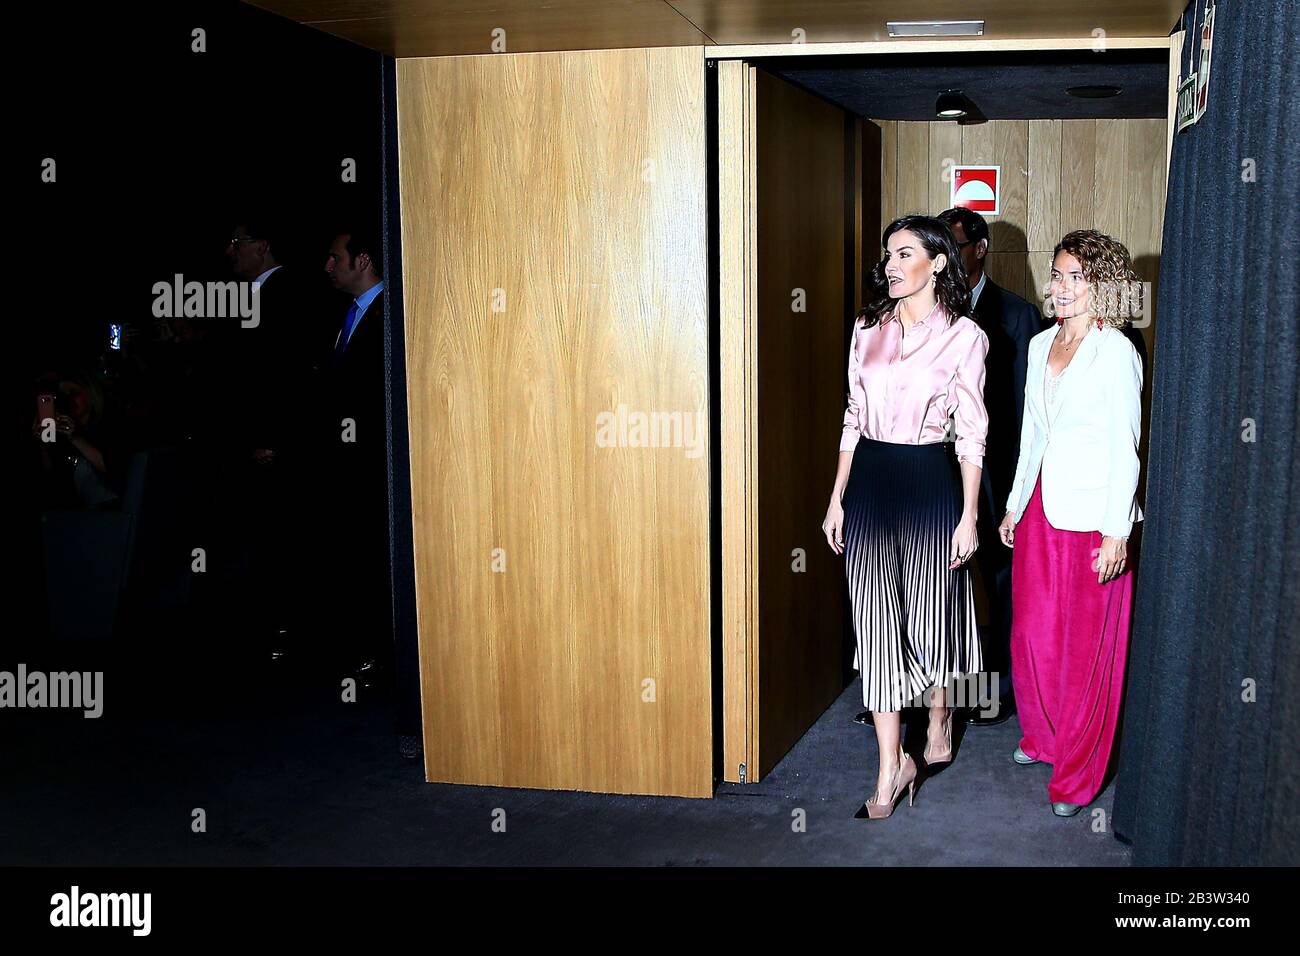 Madris, spain, 05/03/2020.- Queen Letizia (L) and Maritxel Batet President of ParliamentQueen of Spain Letizia, together with the Minister of Health, Salvador Illa, presides over the central act of World Rare Disease Day, which is celebrated with the motto 'Grow with you, our hope'. In the city of BBVA in Madrid with the assistance of the president of the Congress, Meritxell Batet; the Spanish Federation of Rare Diseases (Feder in Spanish), Juan Carrión, and that of BBVA, Carlos Torres. On Feder's 20th anniversary, the queen wanted to recognize the work of the 368 associations that make up the Stock Photo